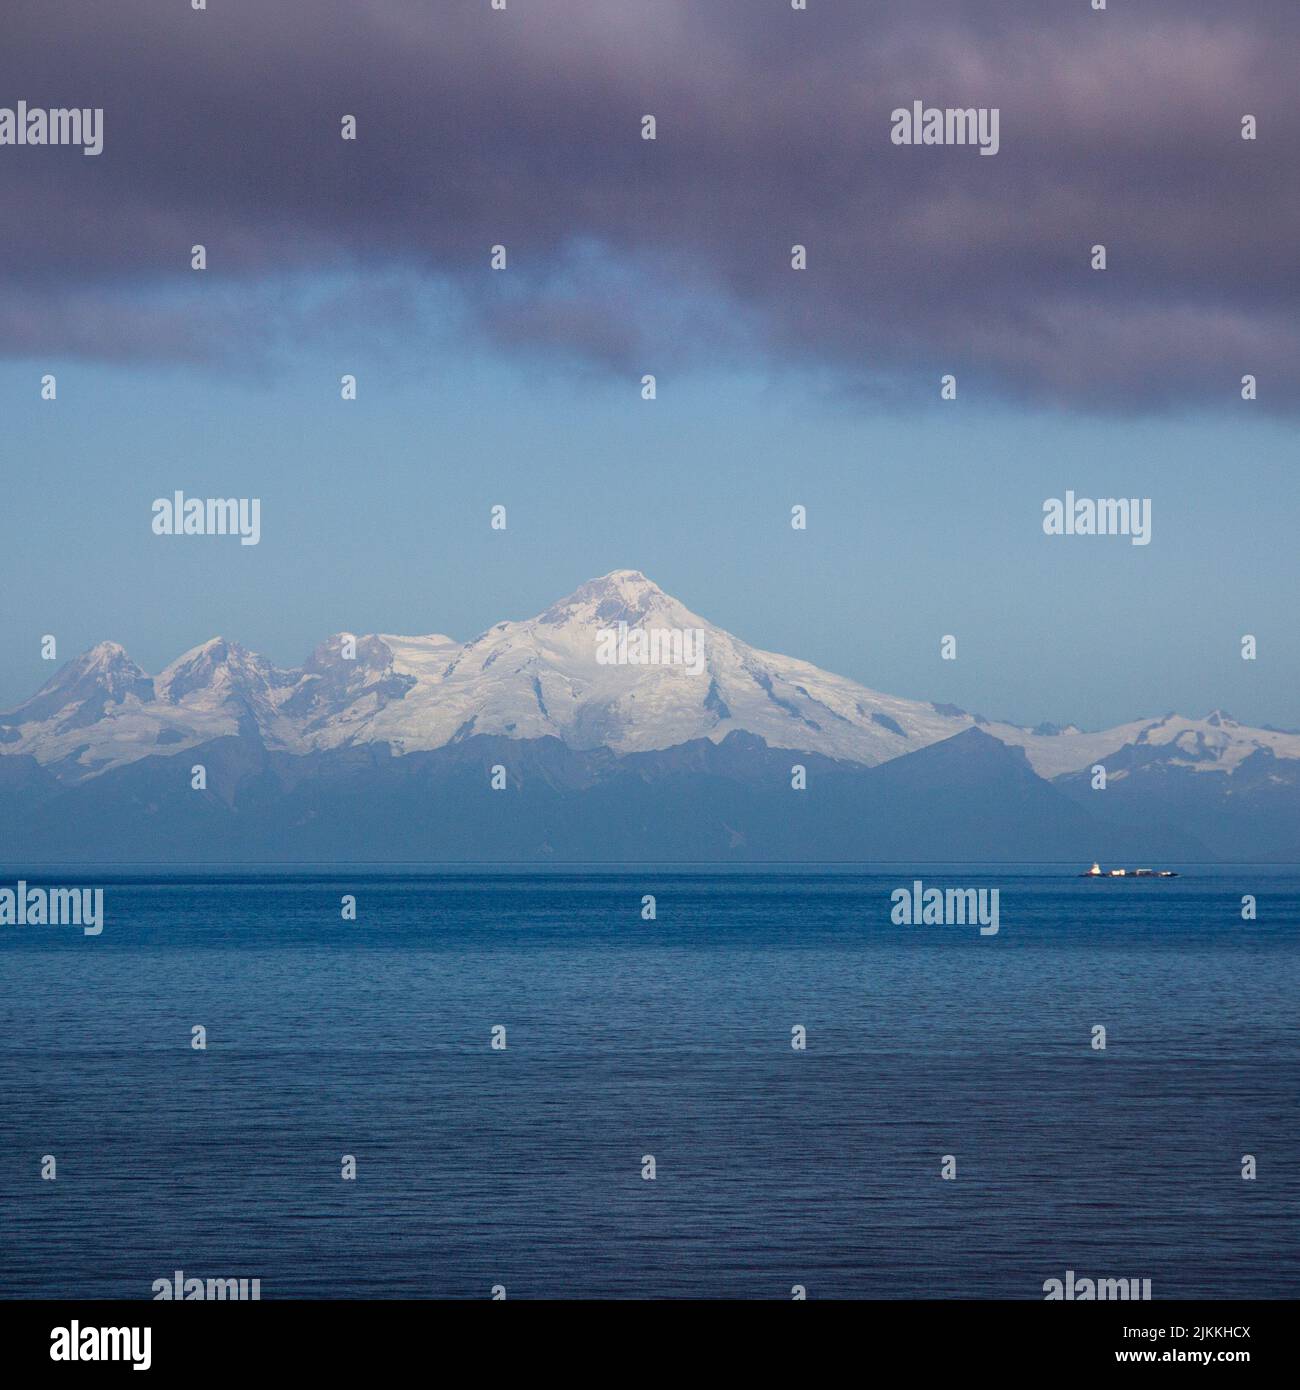 A vertical shot of the Mount Iliamna viewed from the Gulf of Alaska, USA Stock Photo